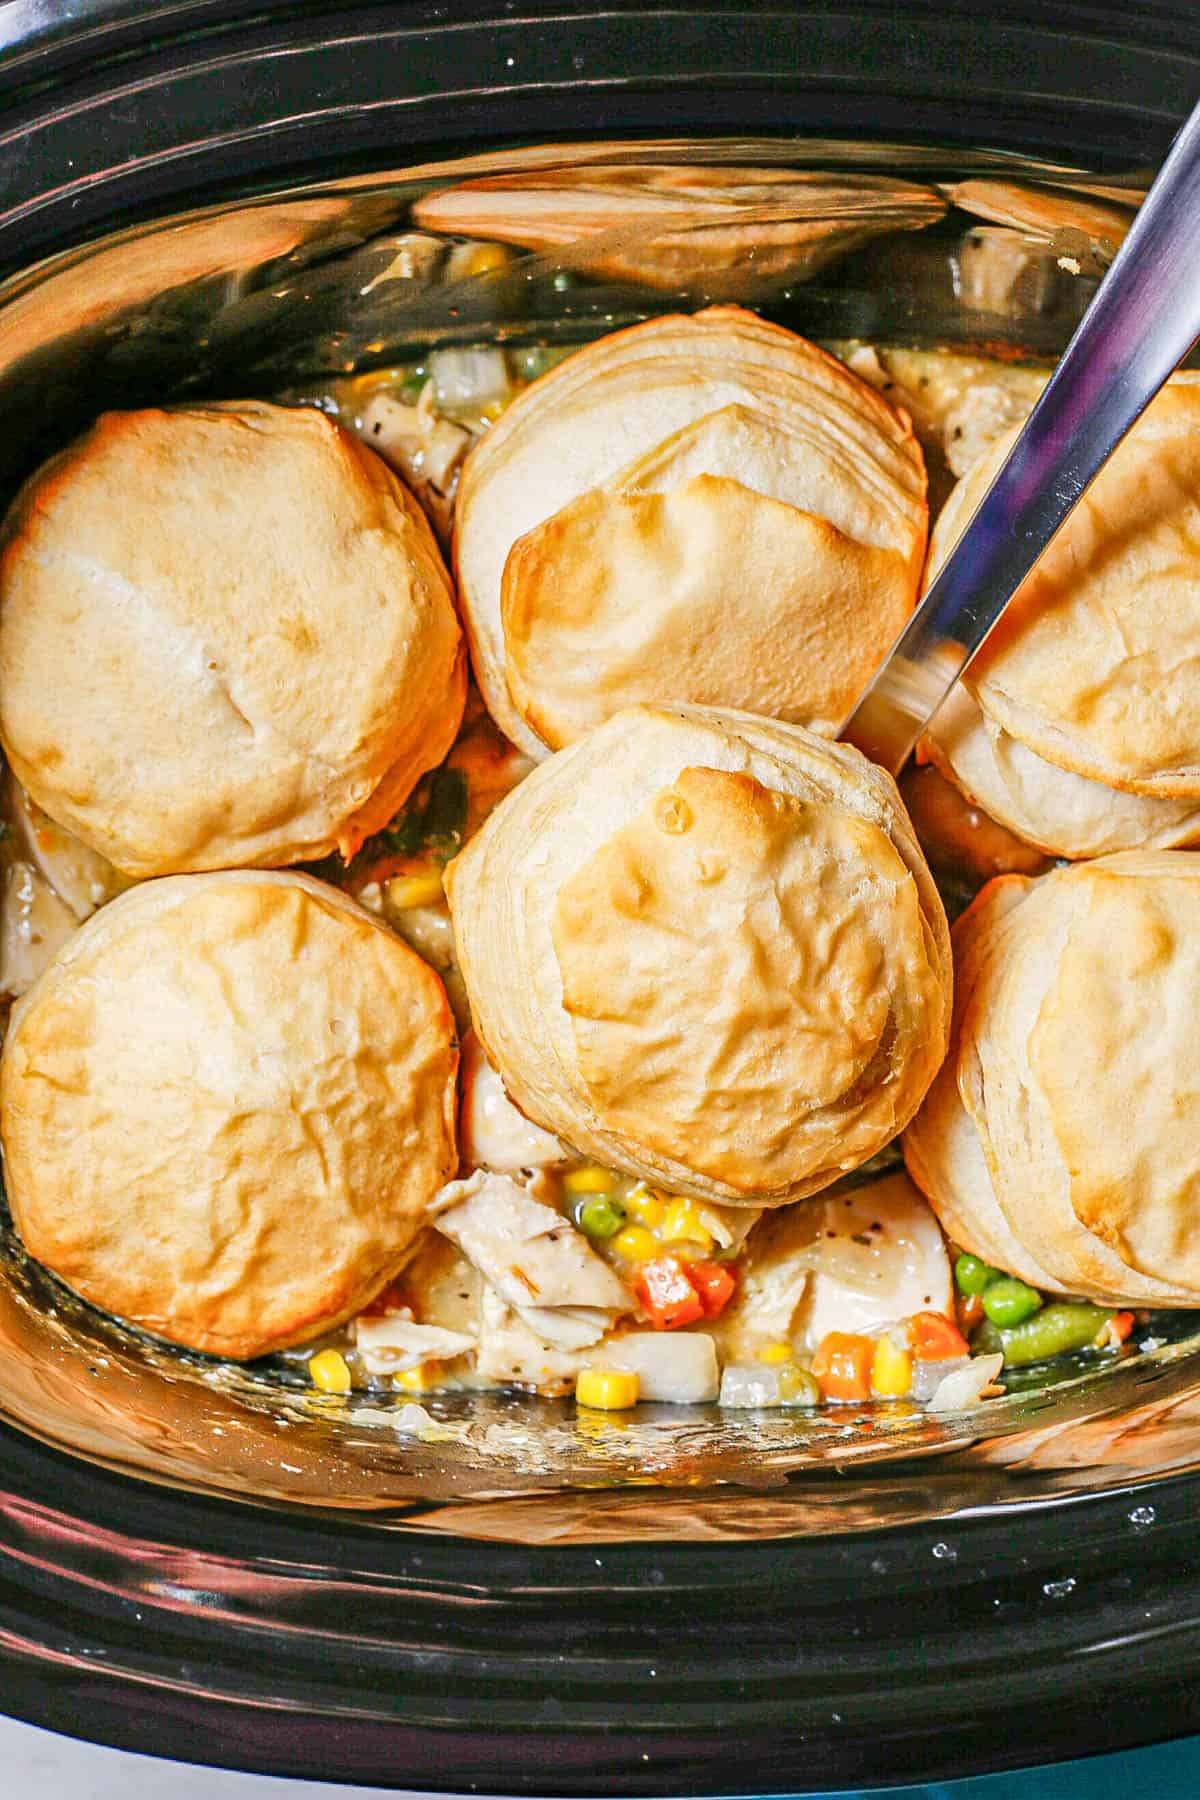 A silver ladle scooping up chicken pot pie and a biscuit from a crock pot.